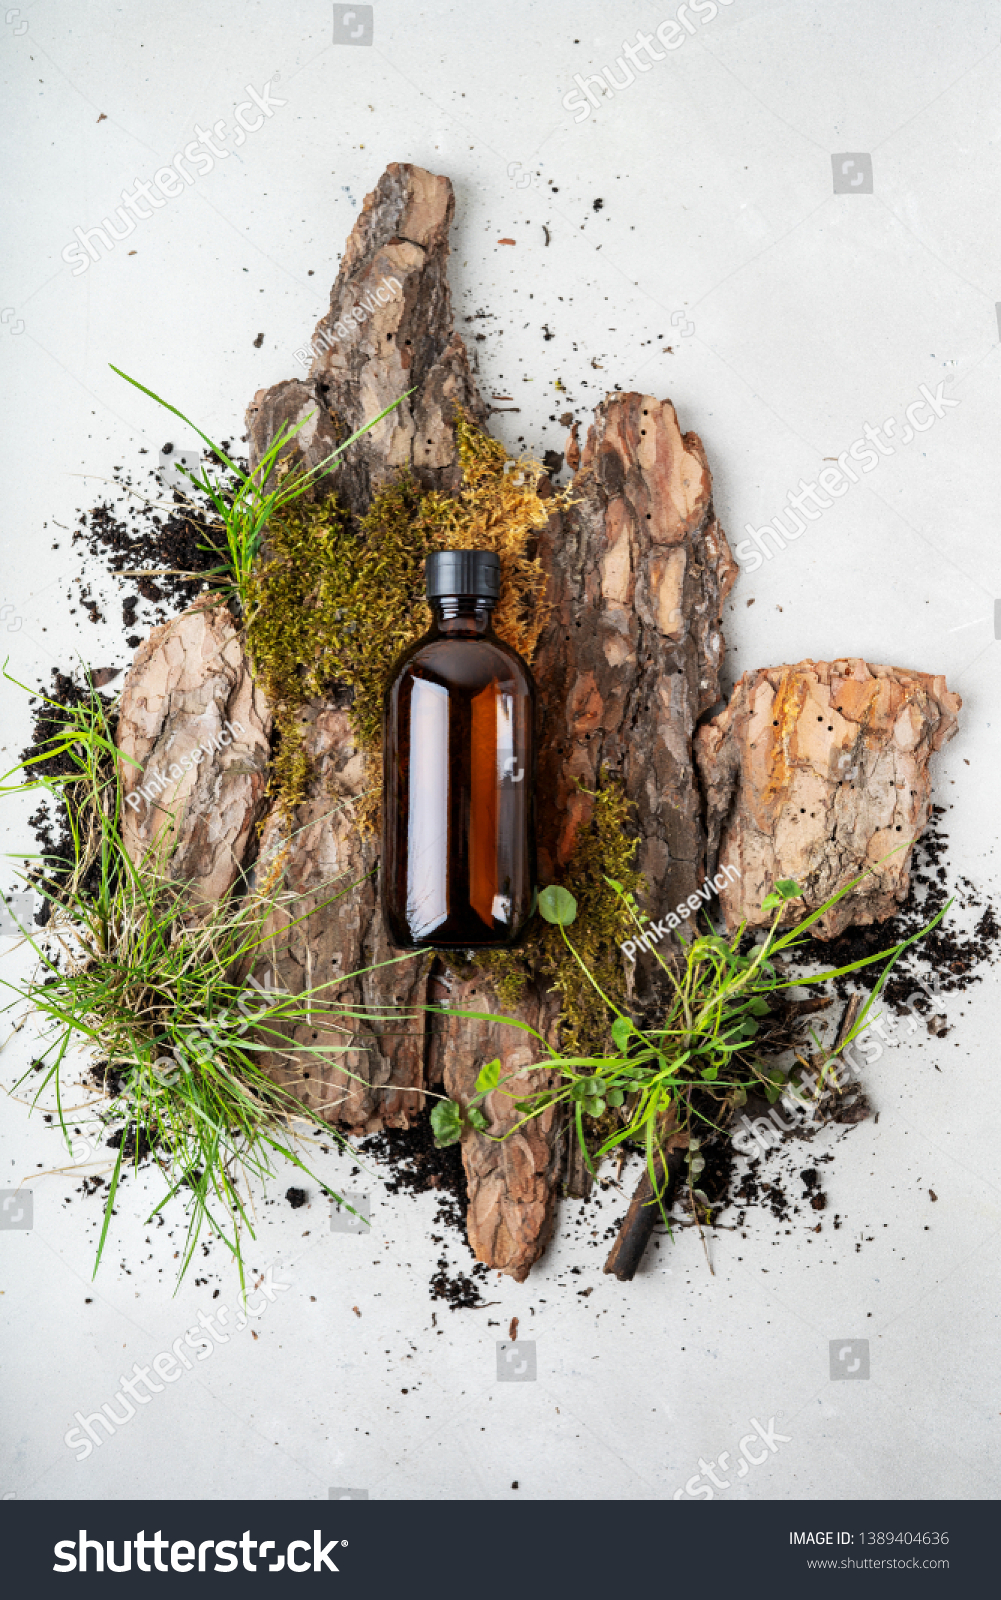 Environmentally clear nature concept background. Composition with glass bottle of shampoo over bark tree, moss and earth with grass for organic cosmetic products on white with copy space. #1389404636